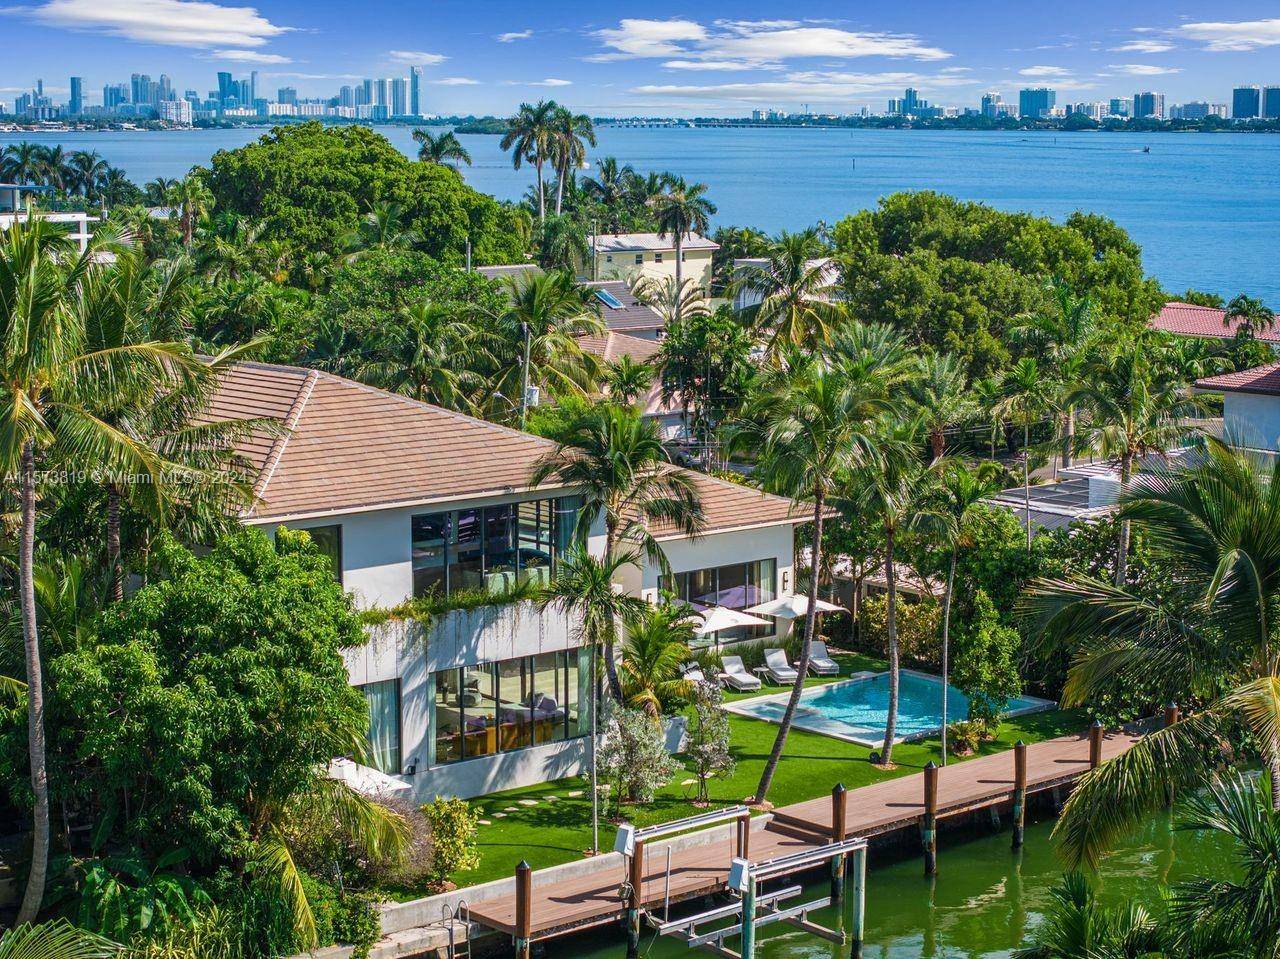 This waterfront new construction home is a masterpiece of tropical modernism.